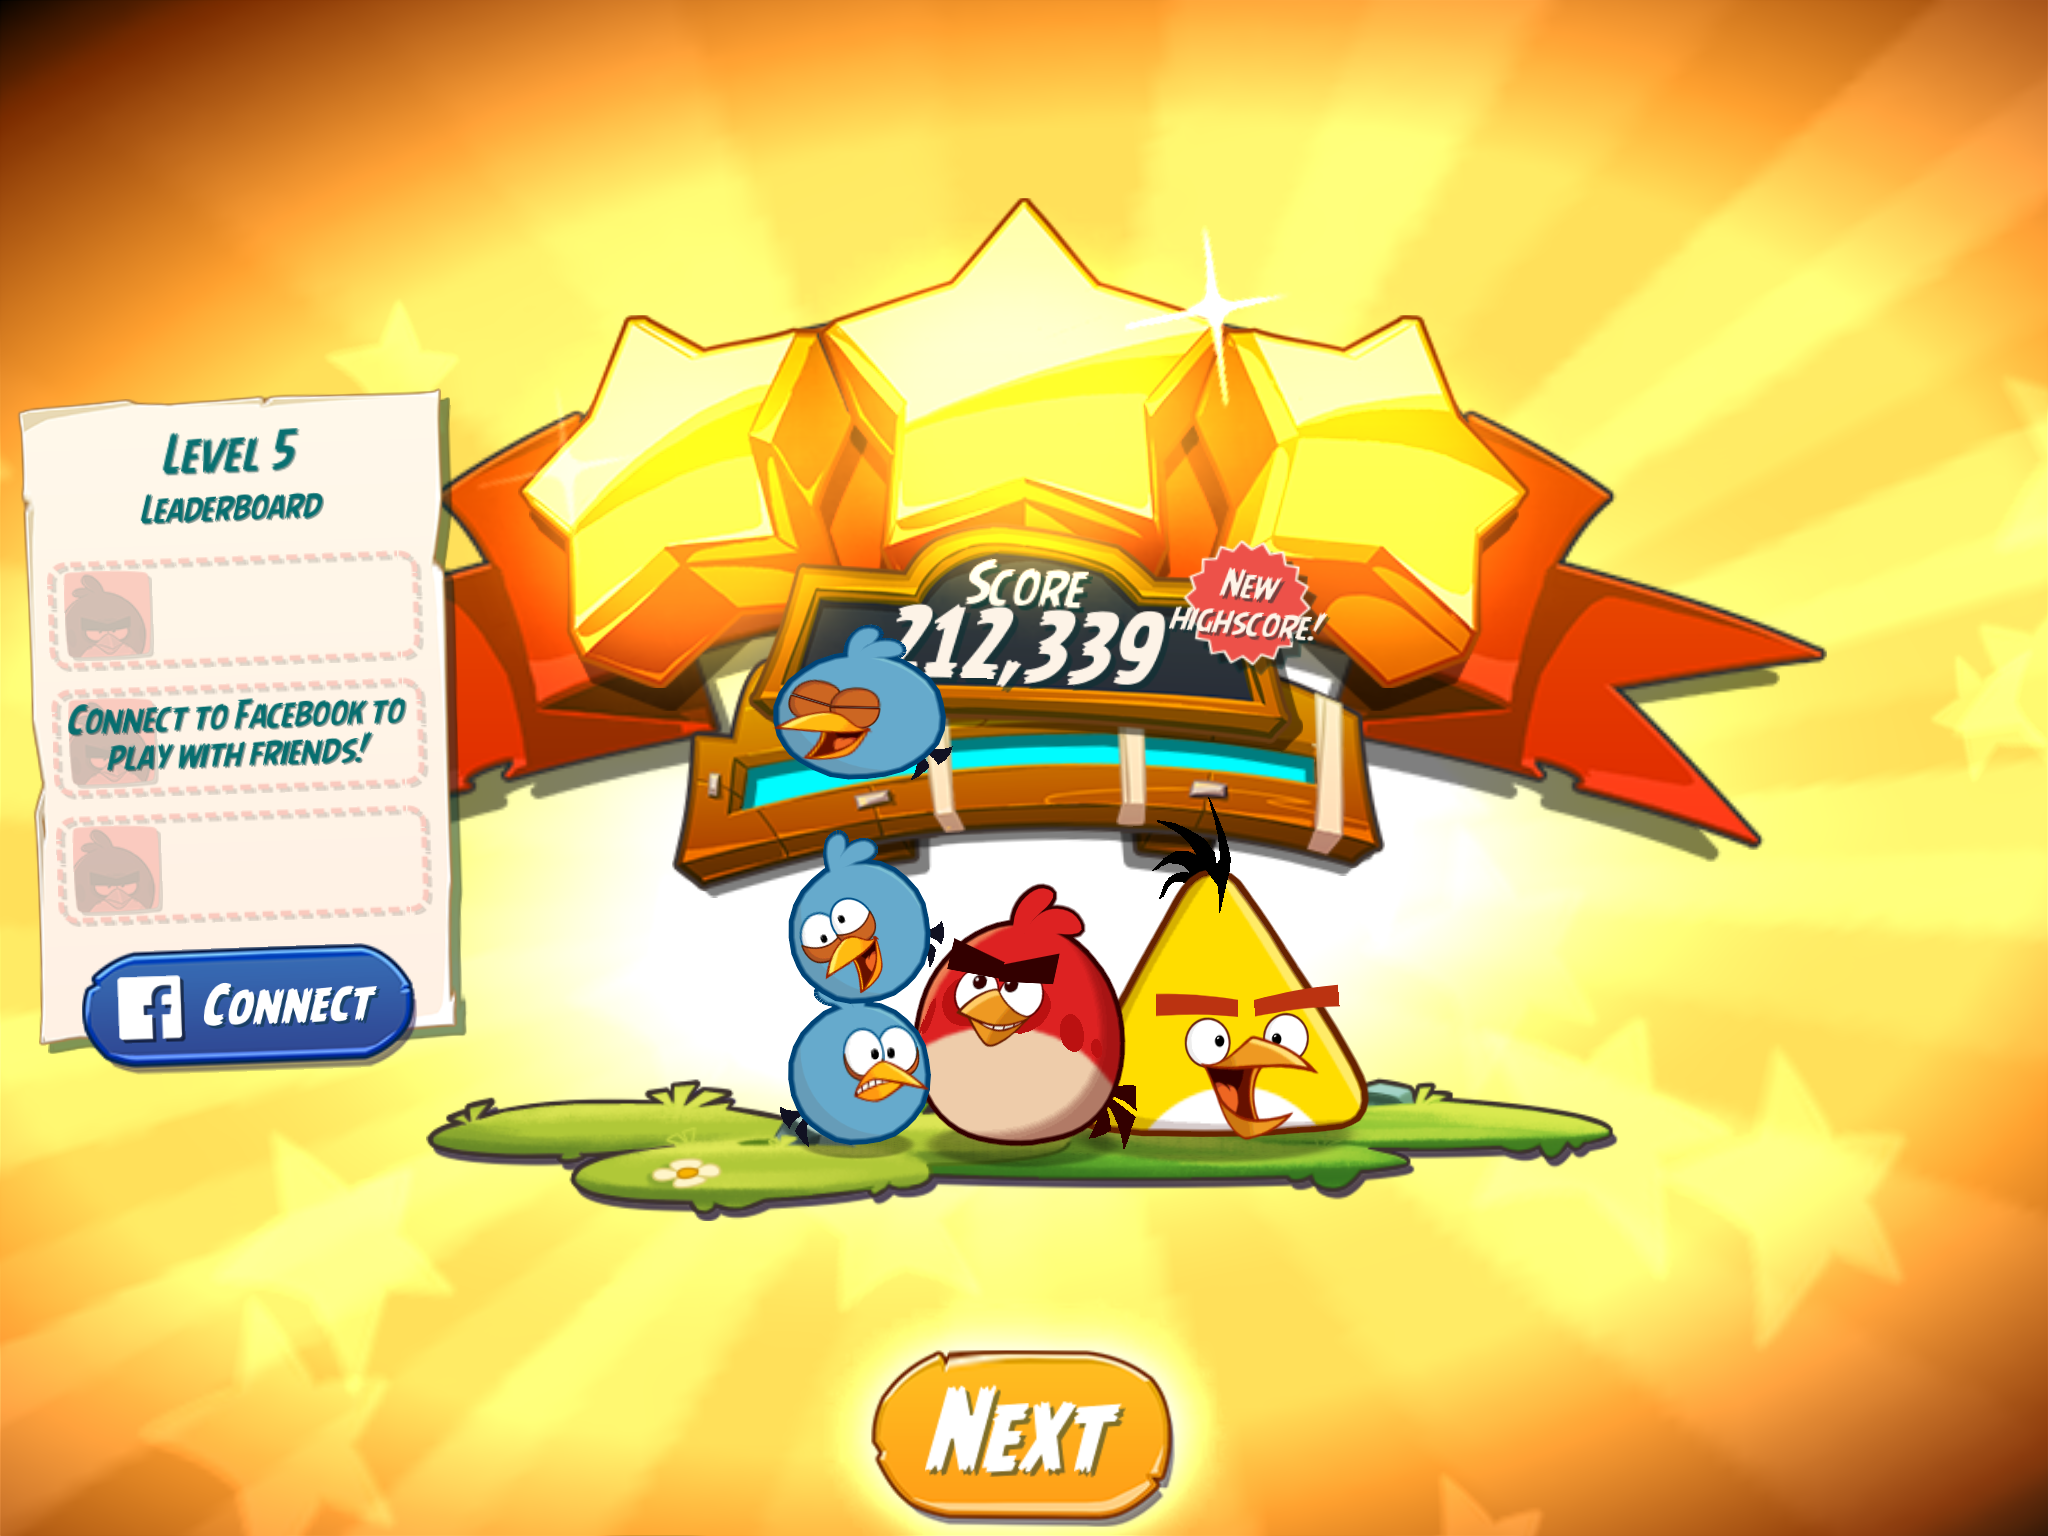 Angry Birds 2: Level 5 212,339 points